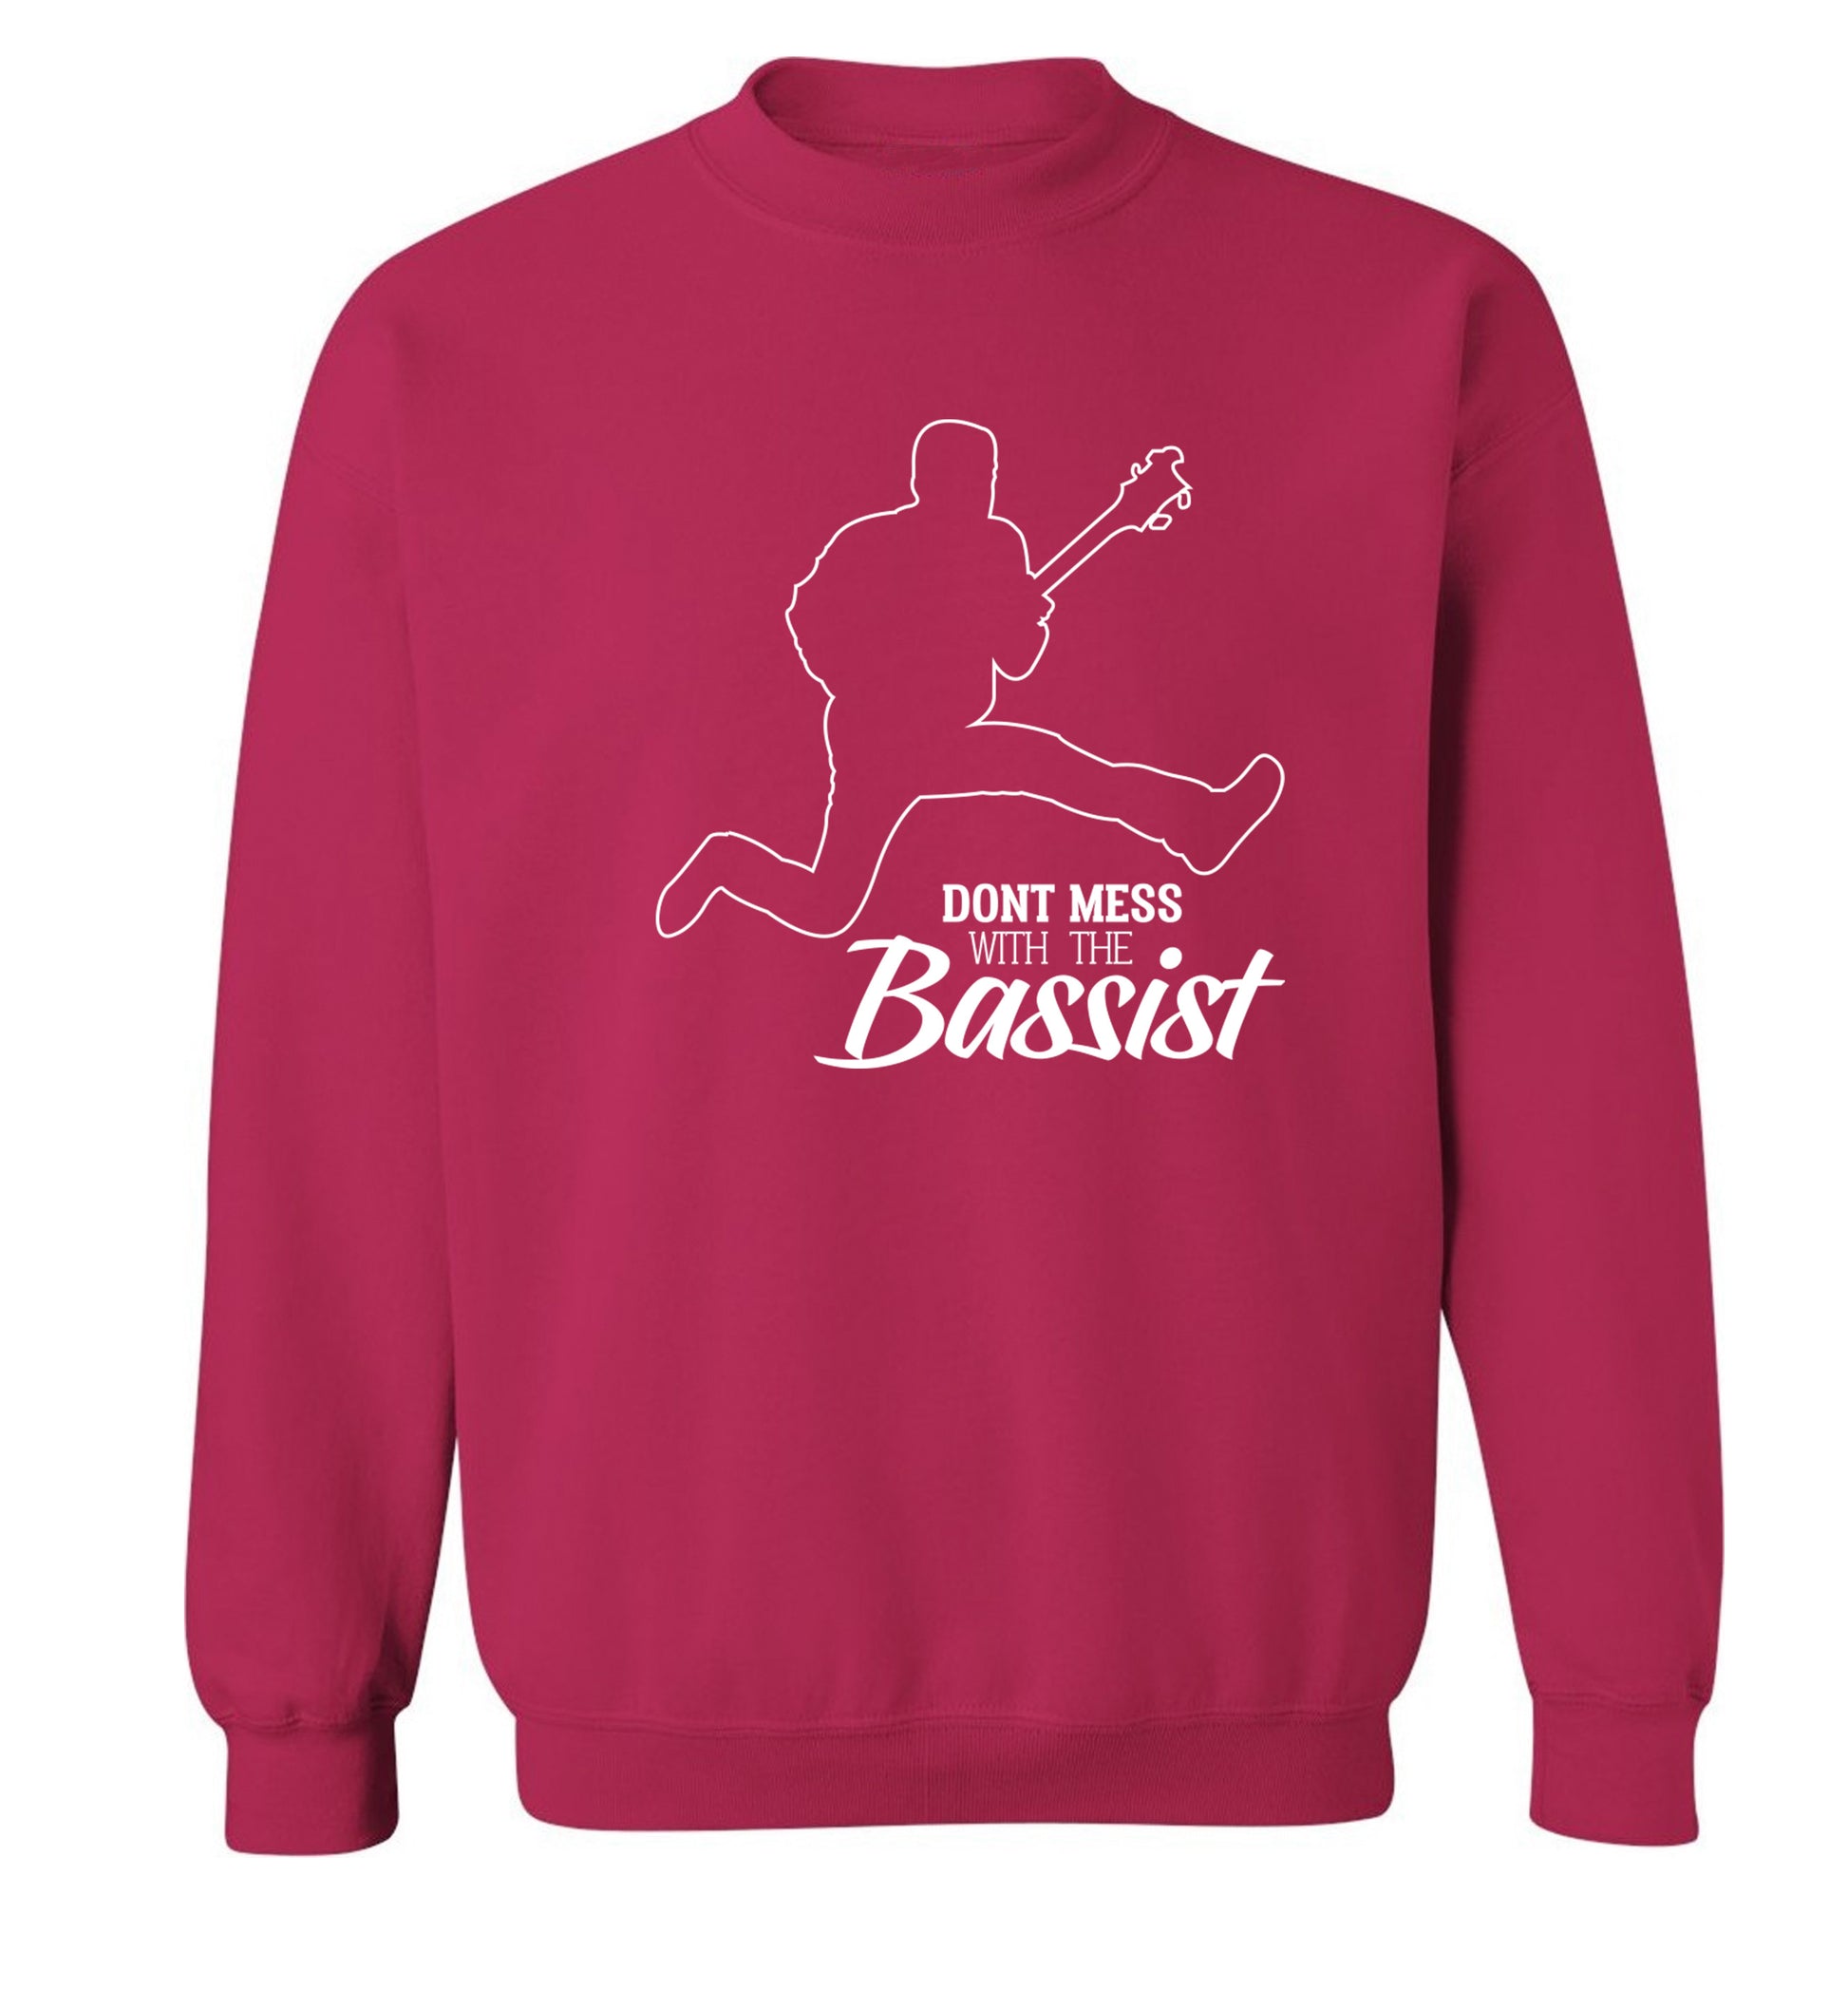 Dont mess with the bassist Adult's unisex pink Sweater 2XL